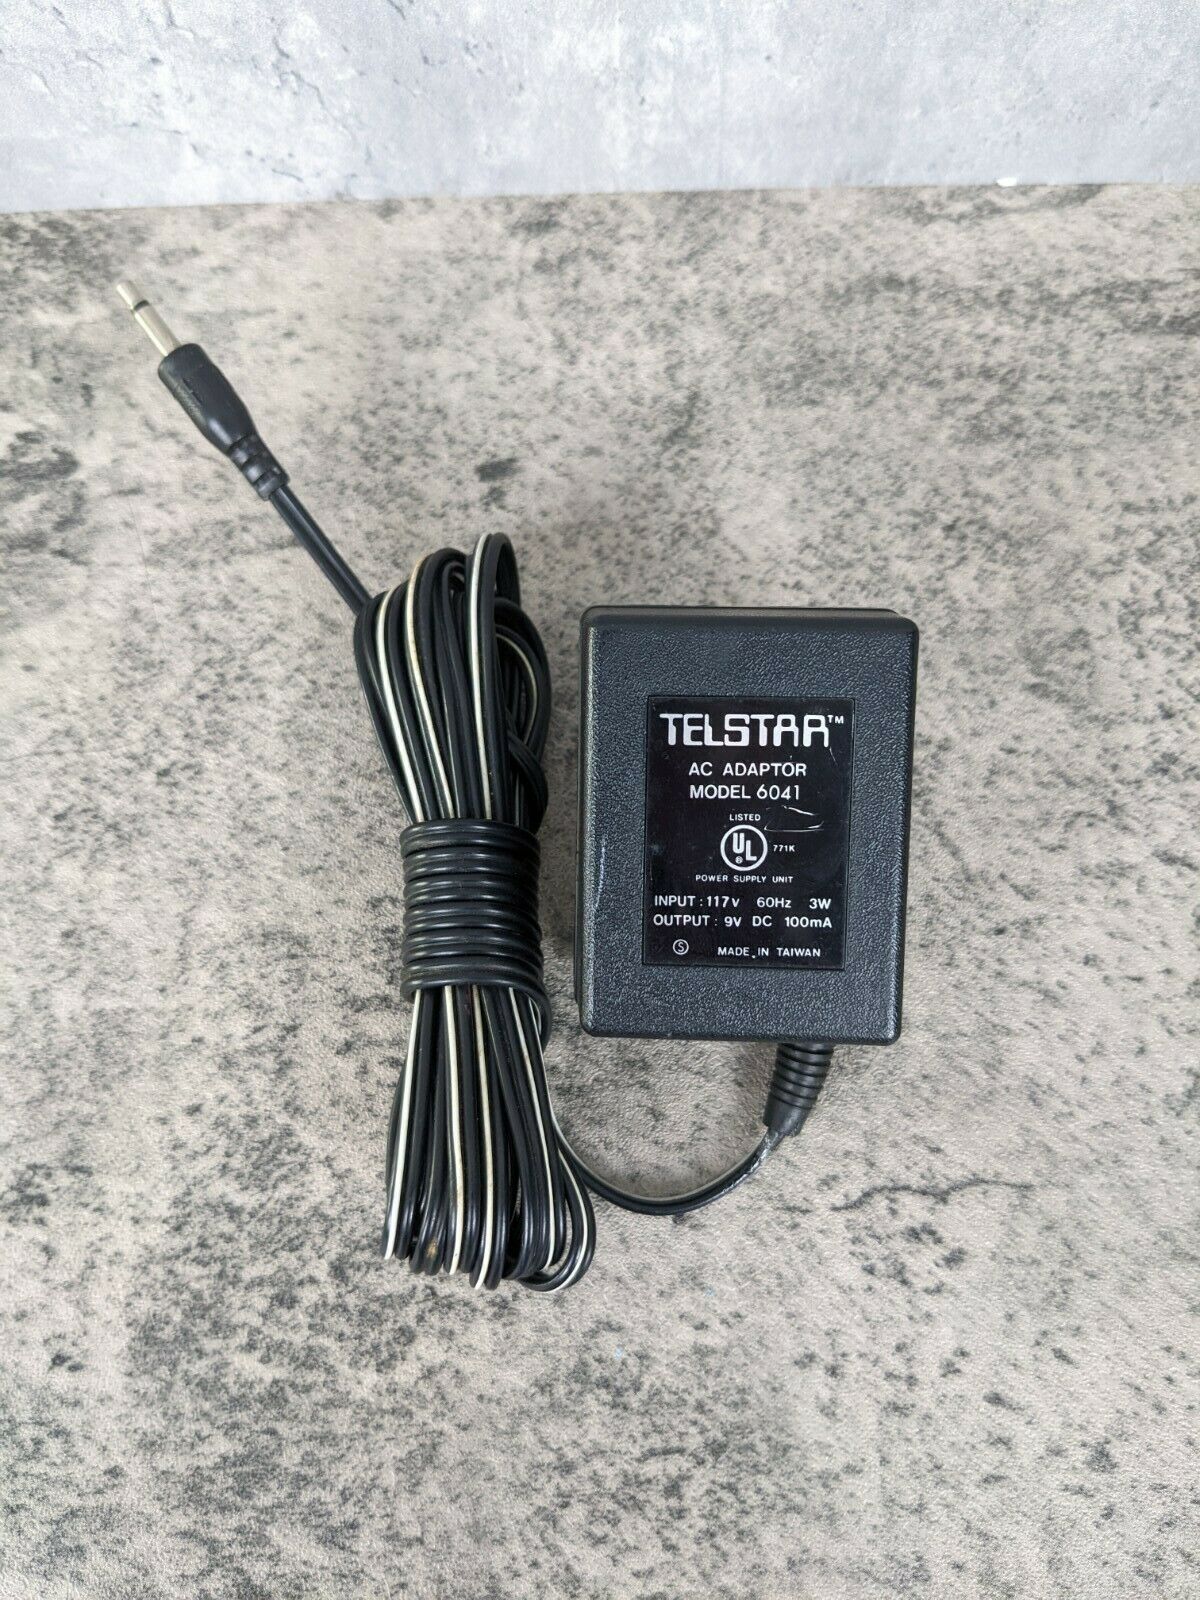 Vintage Coleco Telstar AC Adapter 6041 Original Power Cord Tested Brand: Coleco Type: AC/DC Adapter Compatible Model